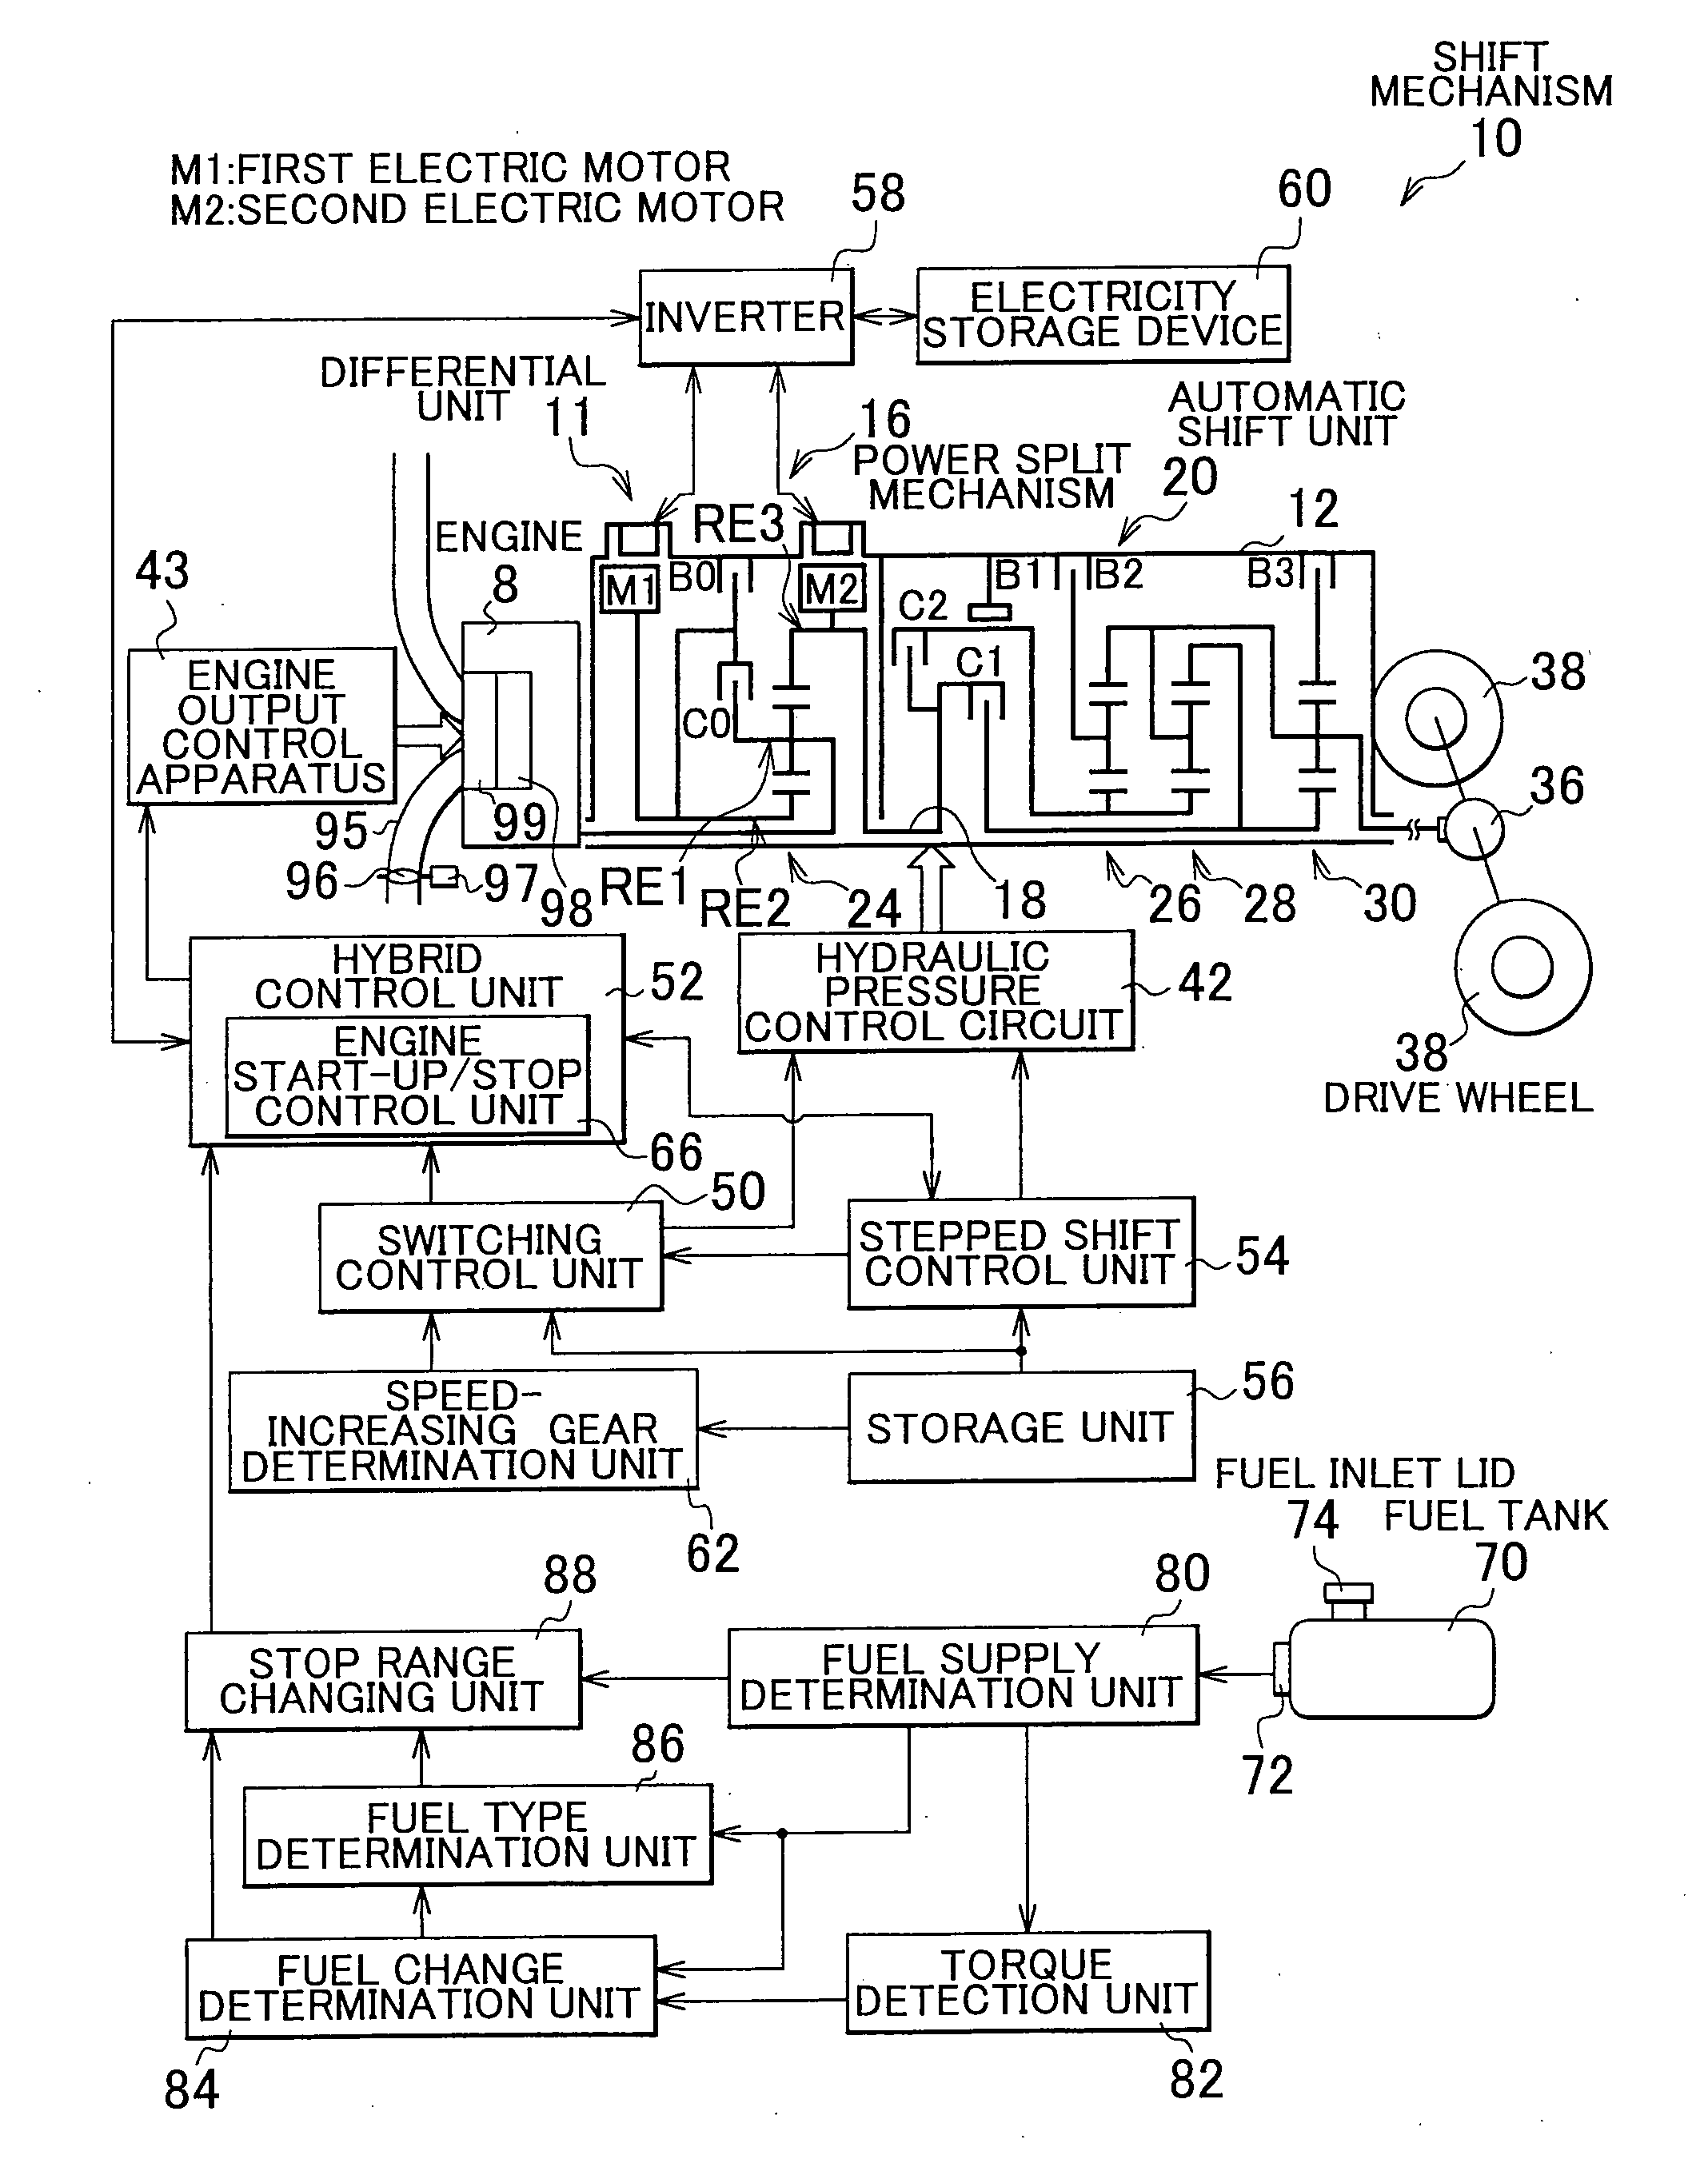 Control apparatus for power transmission system of hybrid vehicle